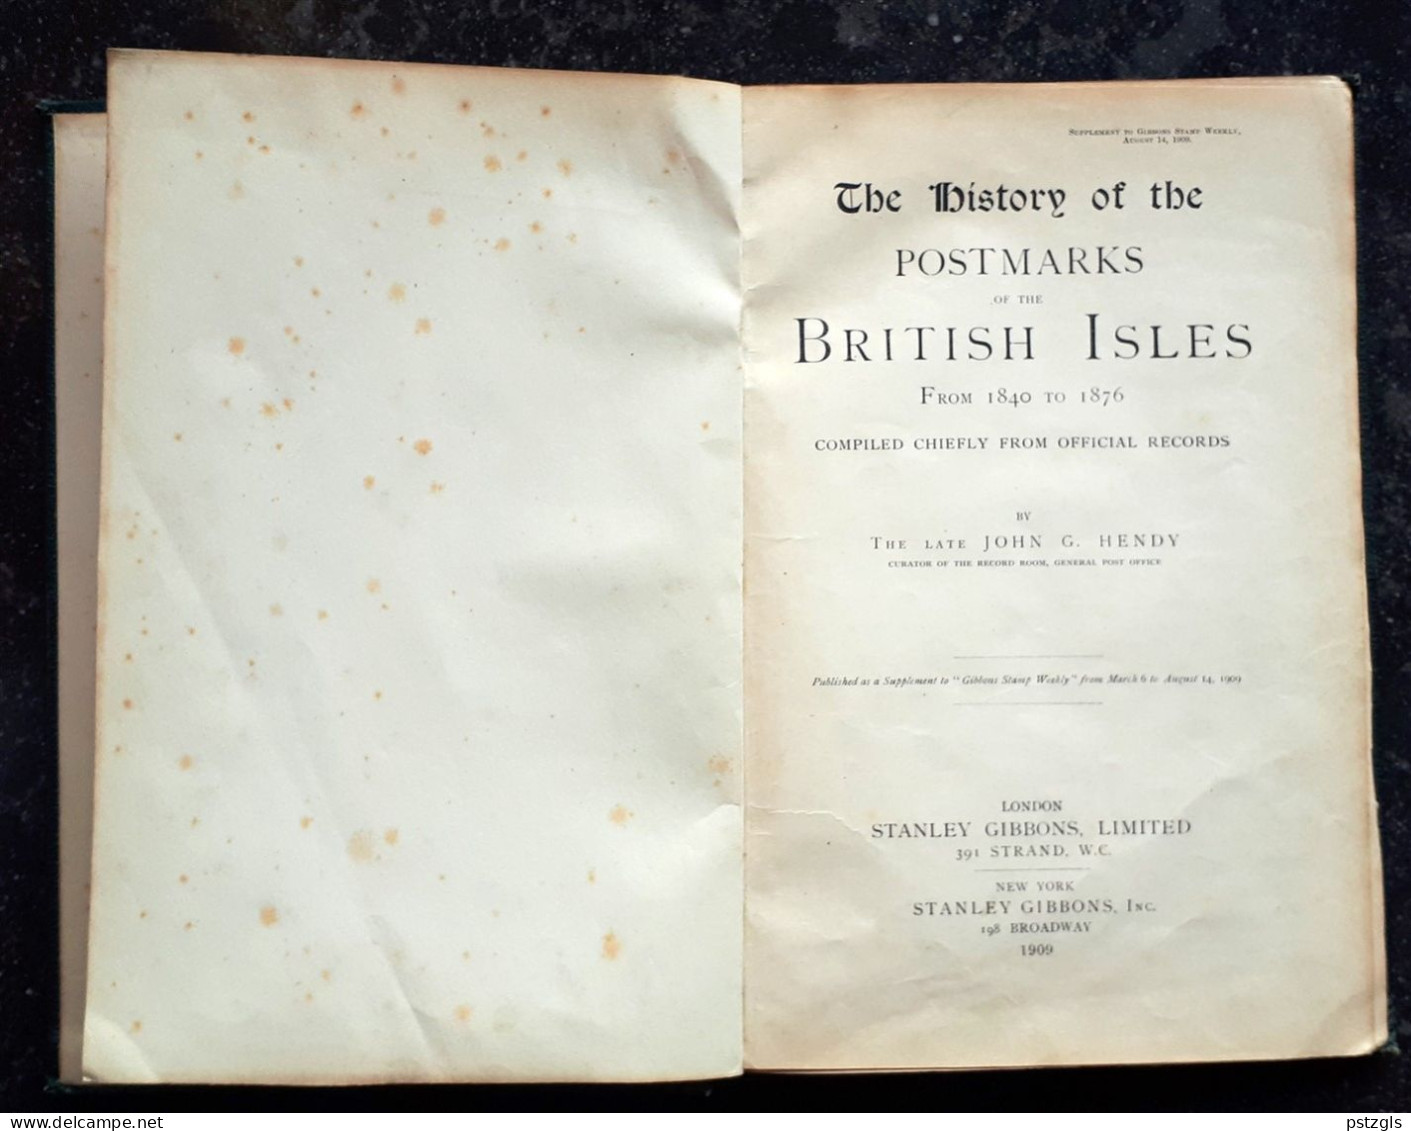 The History Of The Postmarks Of The British Isles From 1840 To 1876 - John G. Hendy - Afstempelingen